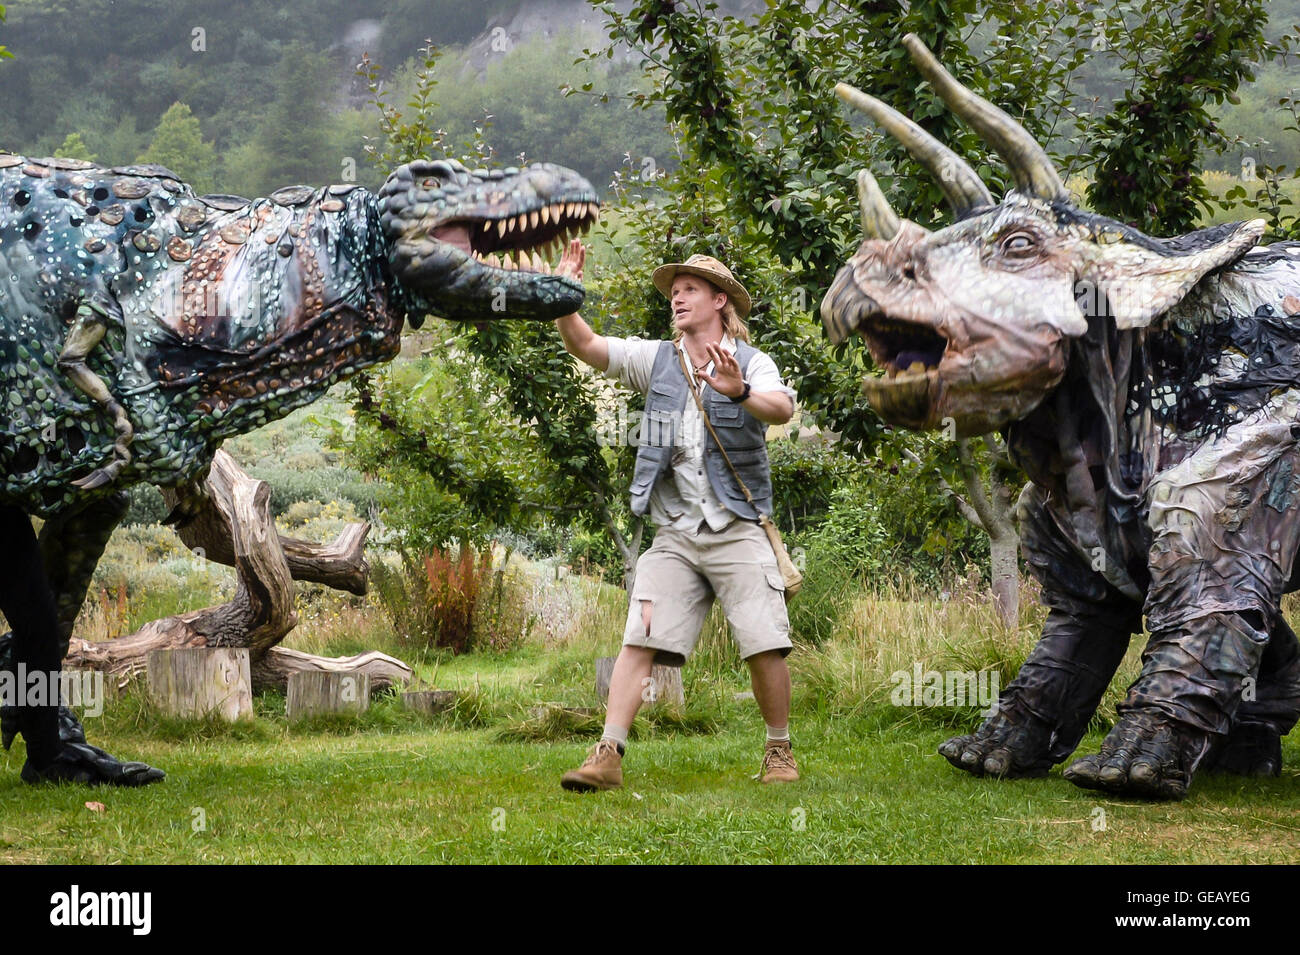 Dinosaur wrangler Robert Copeland tries to separate human-operated puppets of a T-Rex and a Stegasaurus as they wander around the Eden Project, Cornwall, at the start of a weeks-long prehistoric invasion called Dinosaur Uprising, where realistic puppets will roam the grounds. Stock Photo